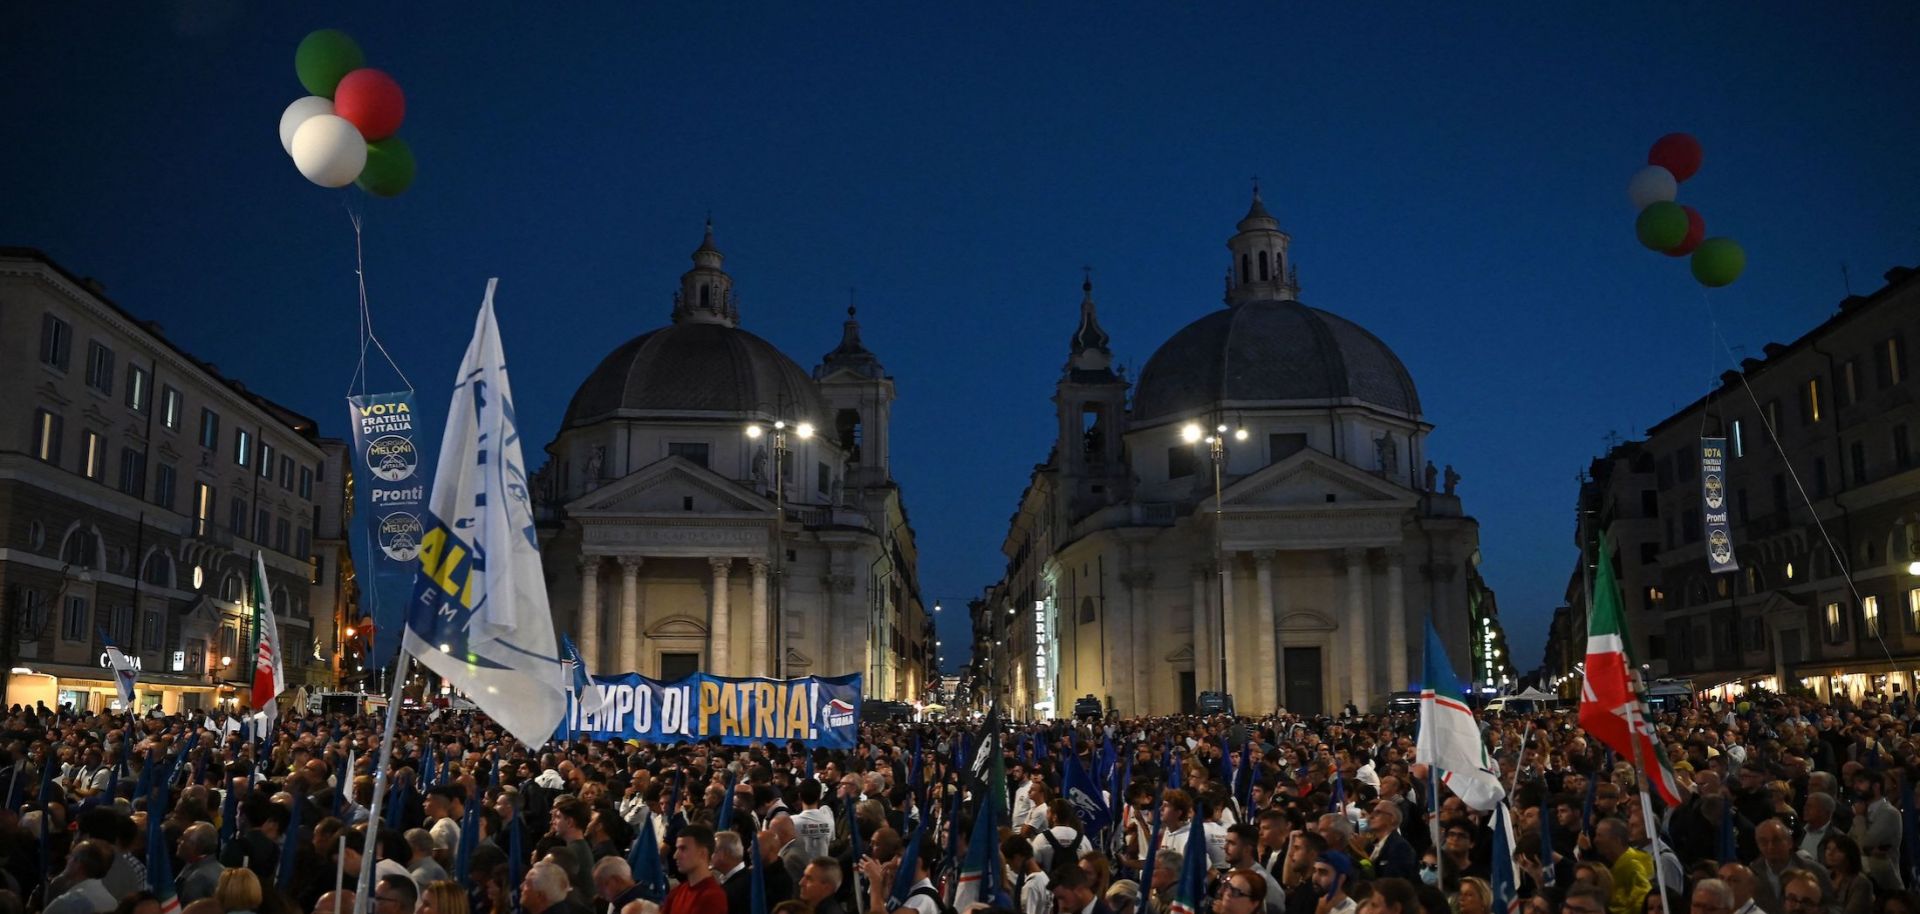 A joint rally of Italy's right-wing parties Brothers of Italy, Lega and Forza Italia takes place at Piazza del Popolo in Rome on Sept. 22, 2022.